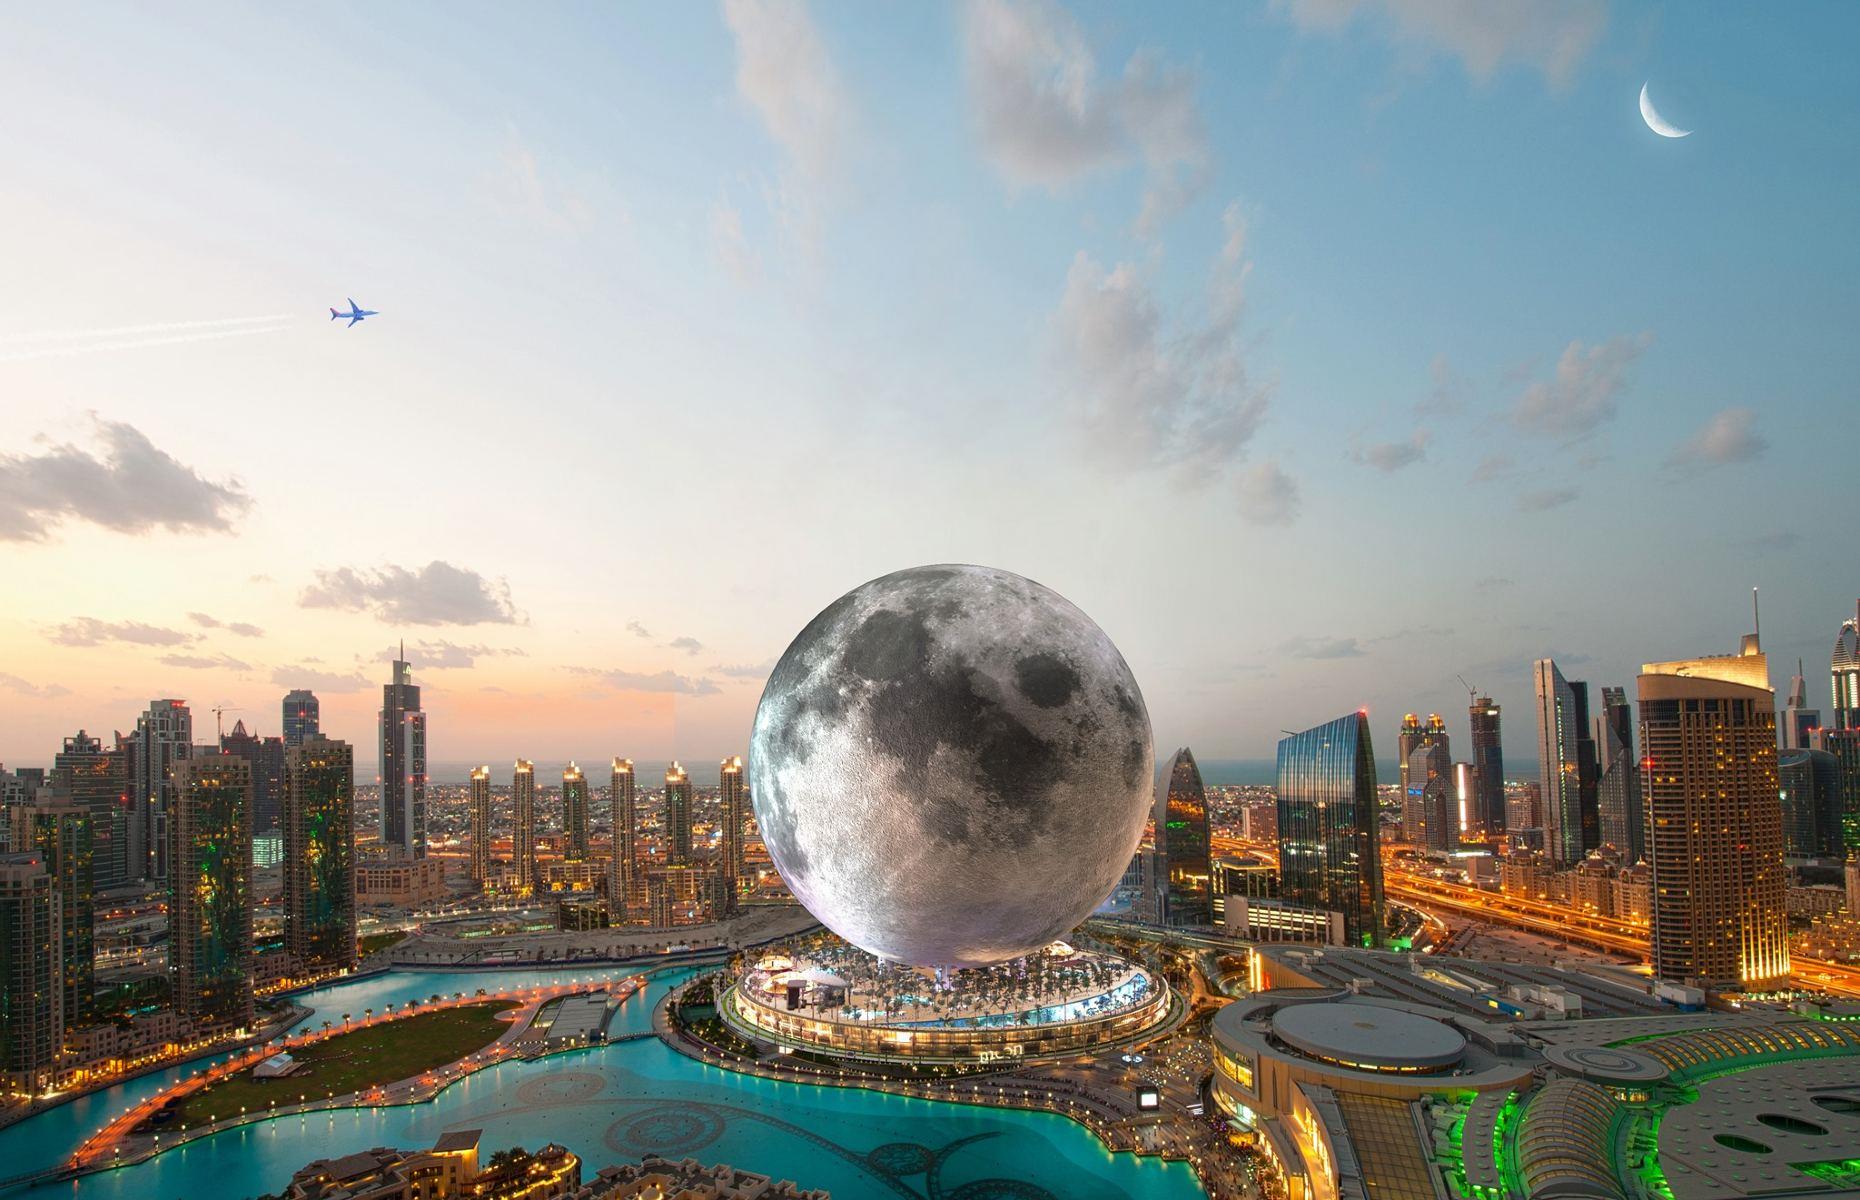 <p>Offering an extraterrestrial experience right here on Earth, MOON is billed as a buzzy new addition to Dubai’s (already extremely extravagant) hotel scene. The plan, which is the brainchild of Canadian company Moon World Resorts, includes a 735-foot-tall (224m) sphere designed to look exactly like the Moon, while inside you’ll find a simulation of the lunar surface which allows guests to experience what it would be like on Earth’s only natural satellite.</p>